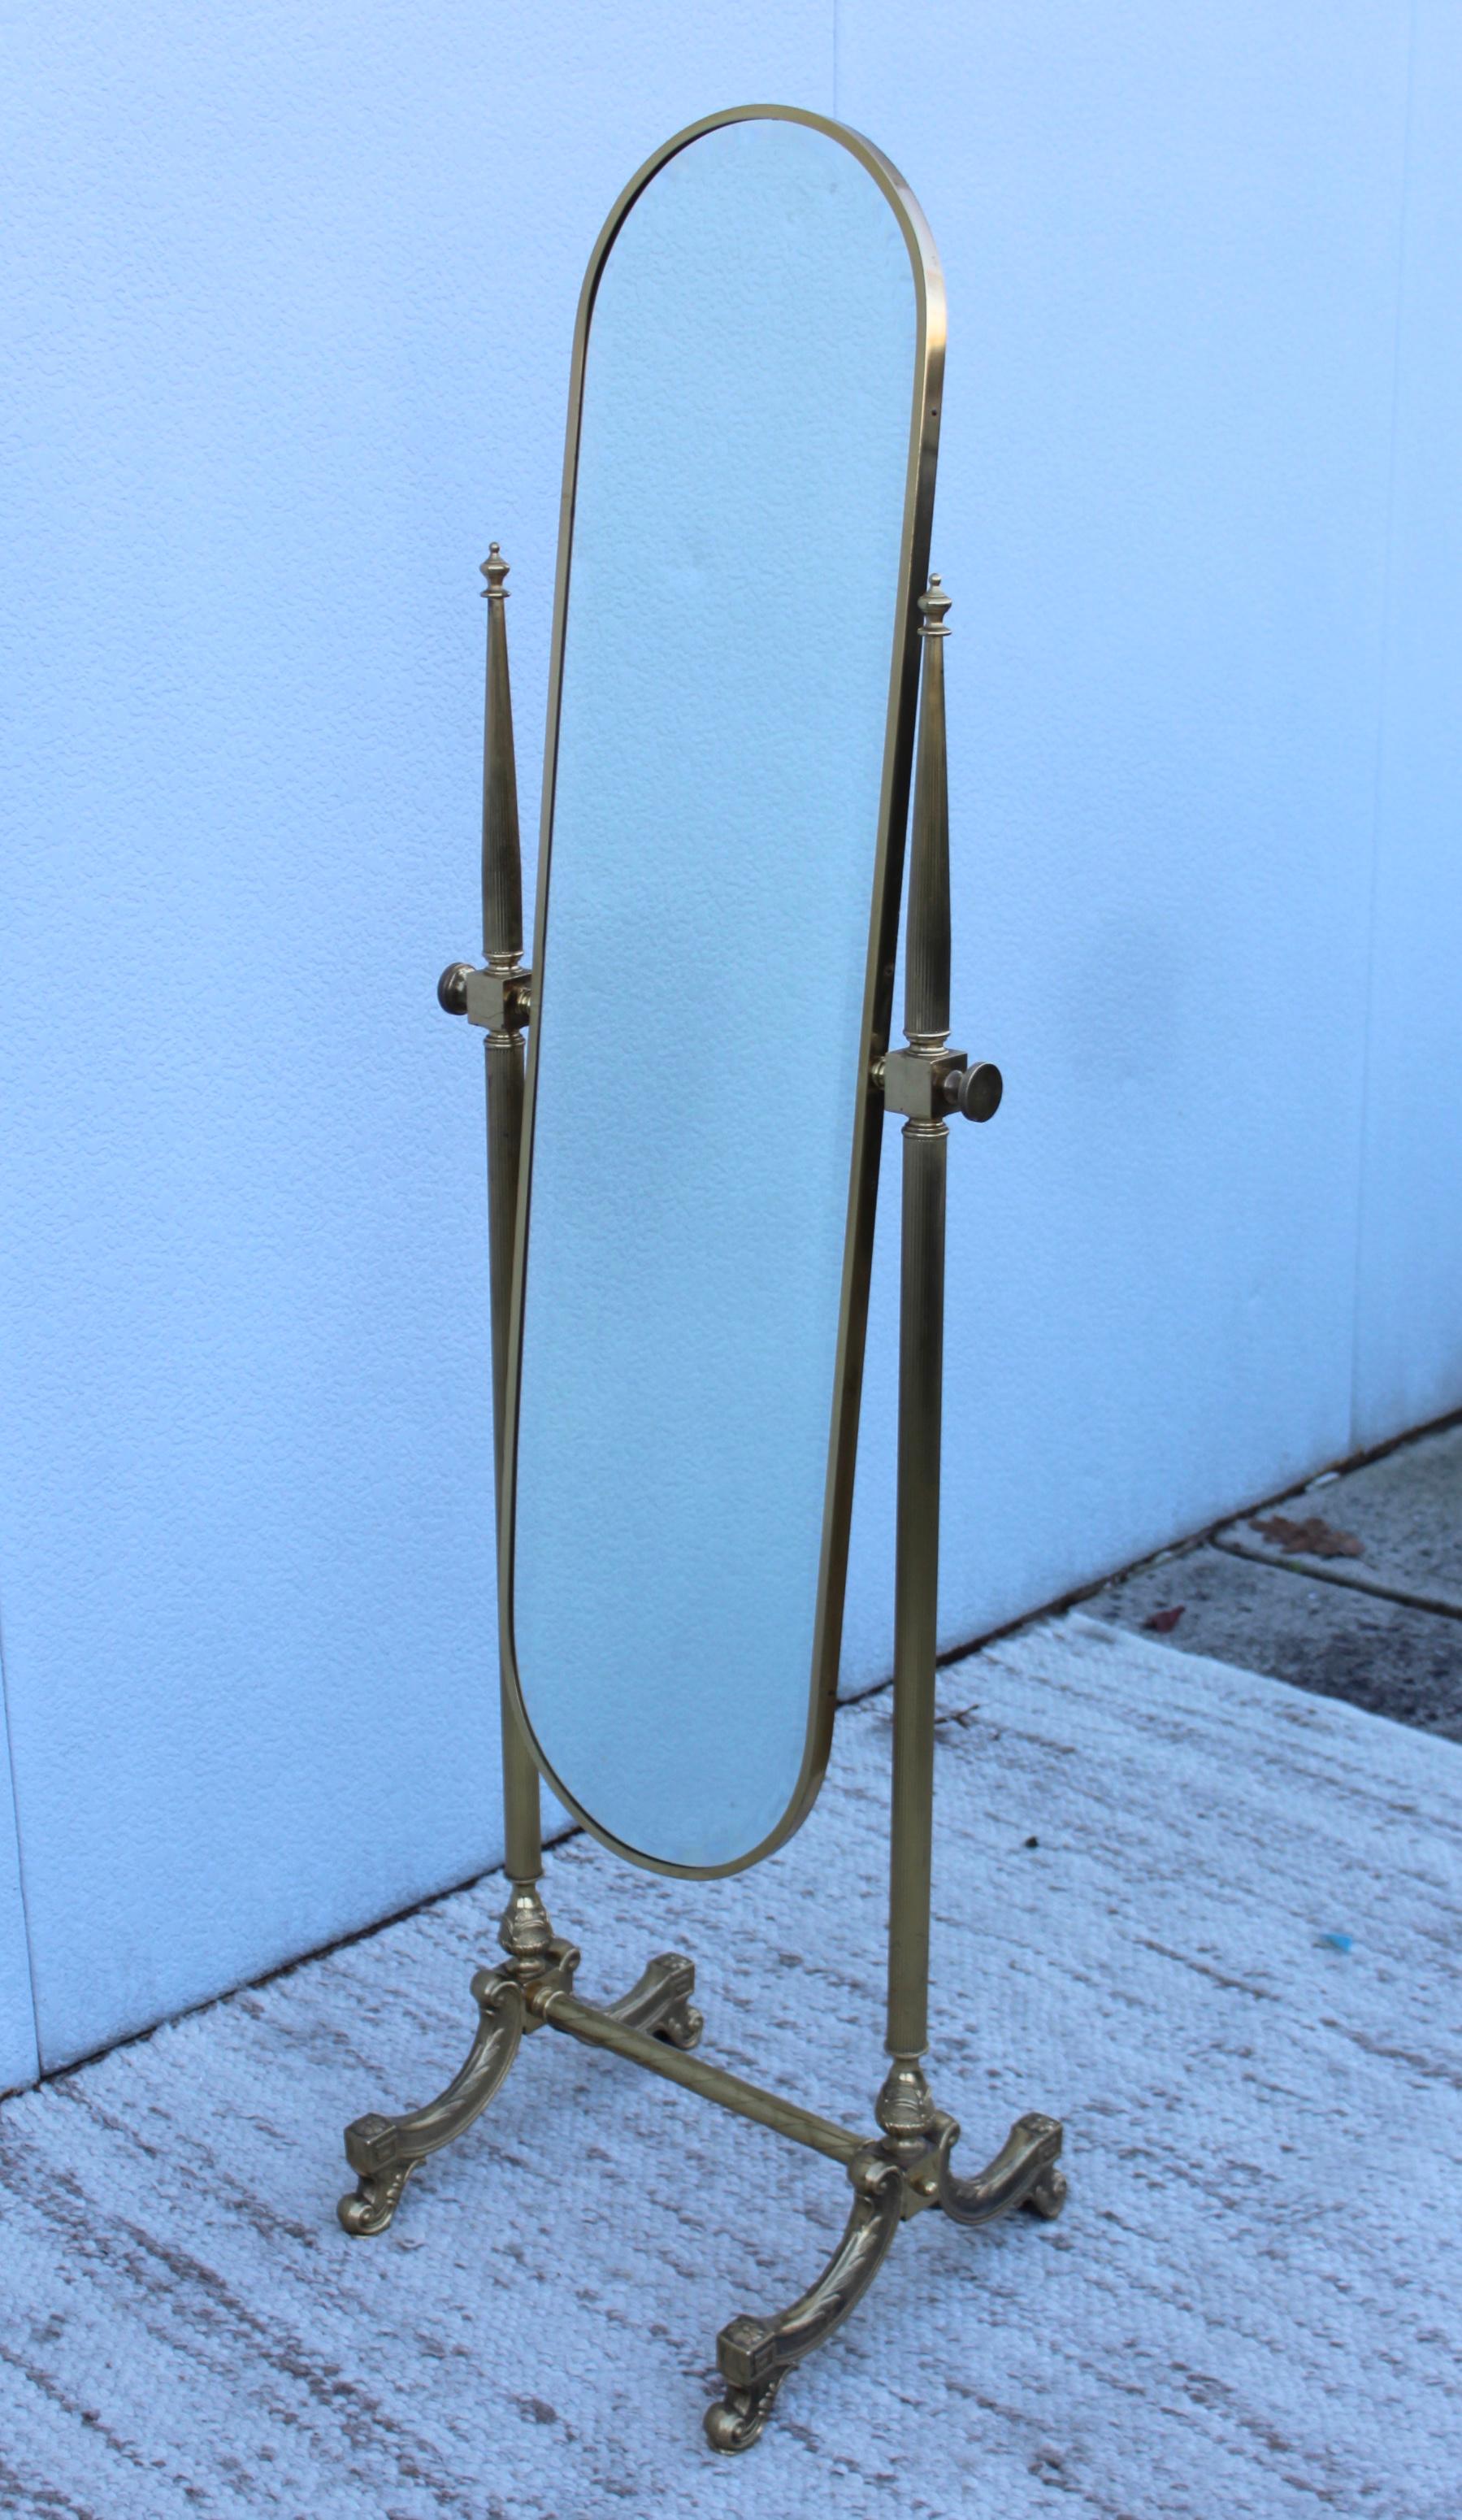 Stunning 1960s solid brass French cheval standing mirror, in vintage original condition with minor wear and patina due to age and use.